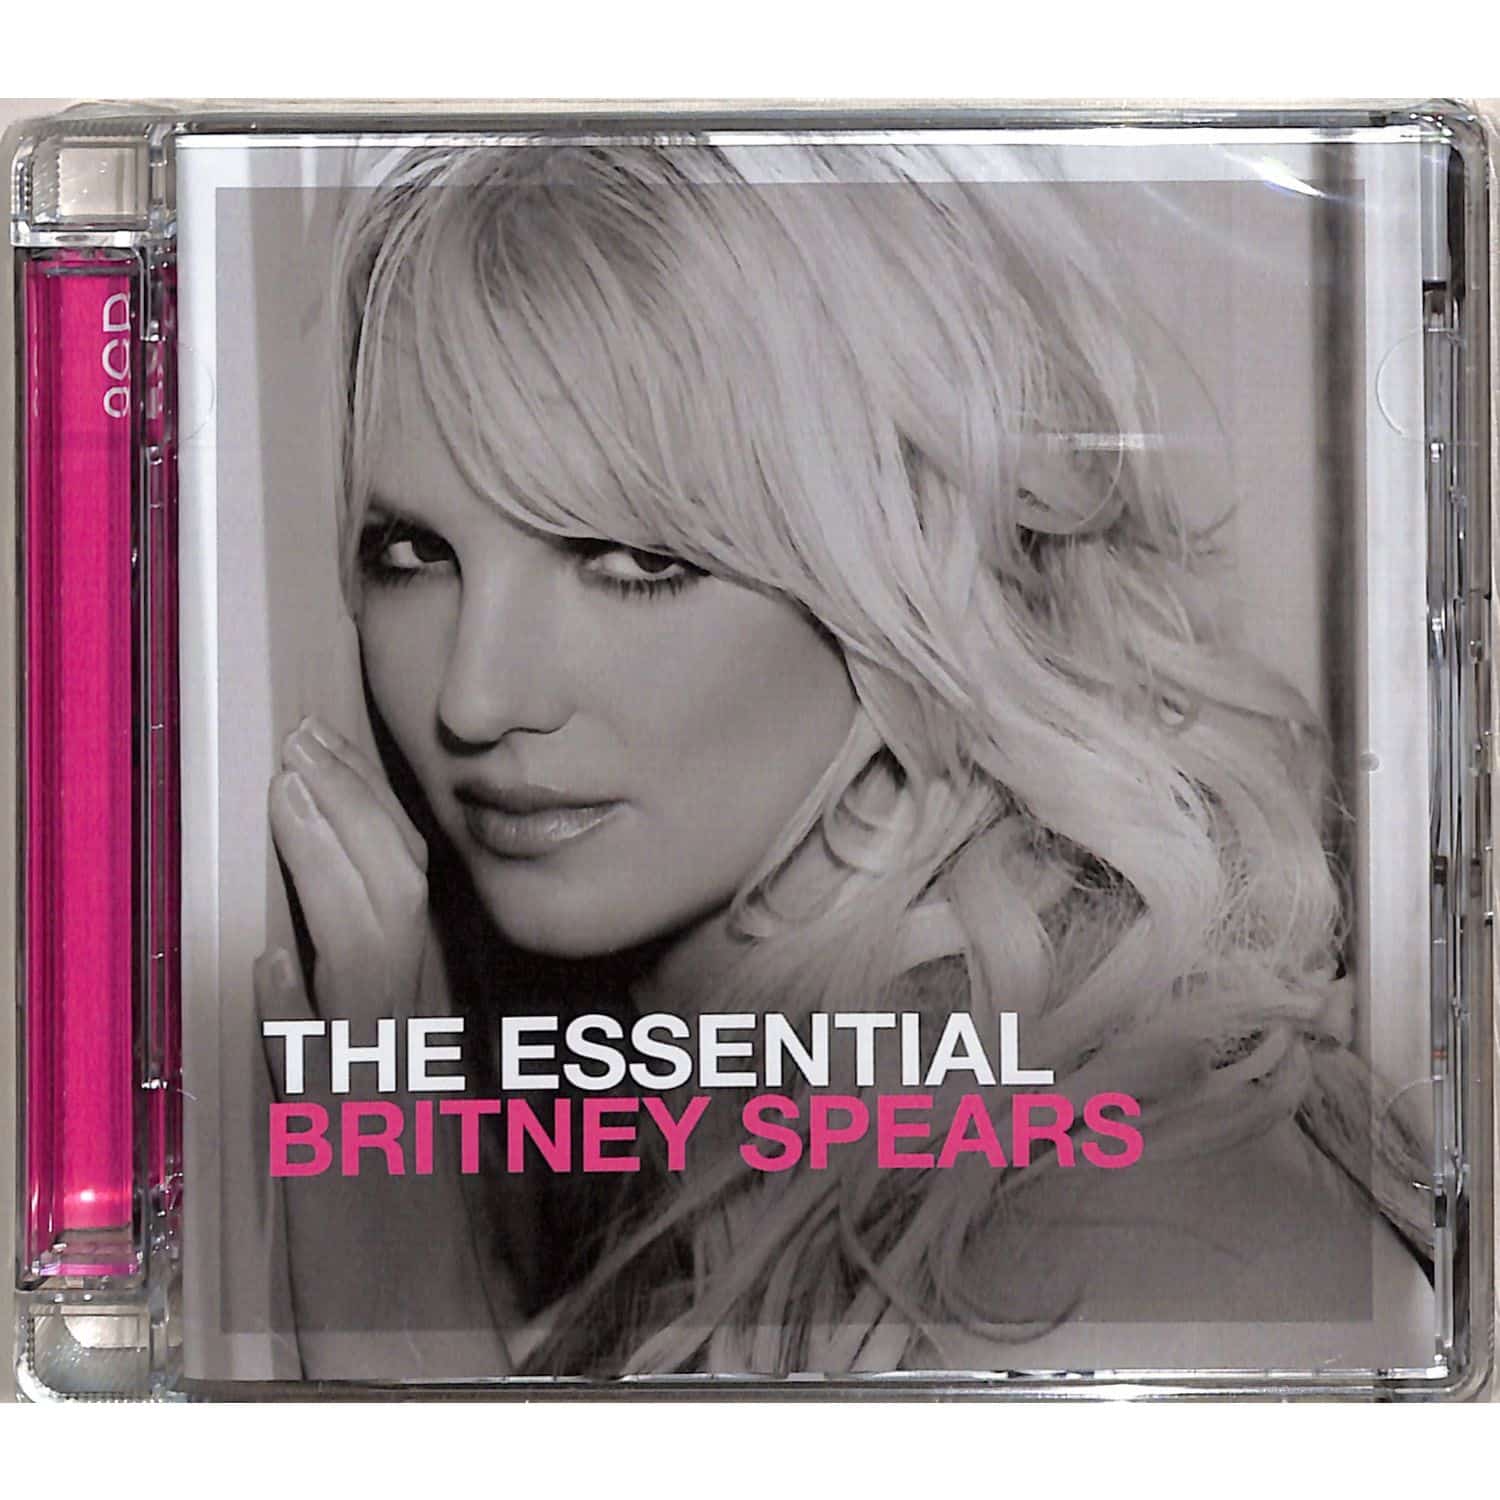 Britney Spears - THE ESSENTIAL BRITNEY SPEARS 